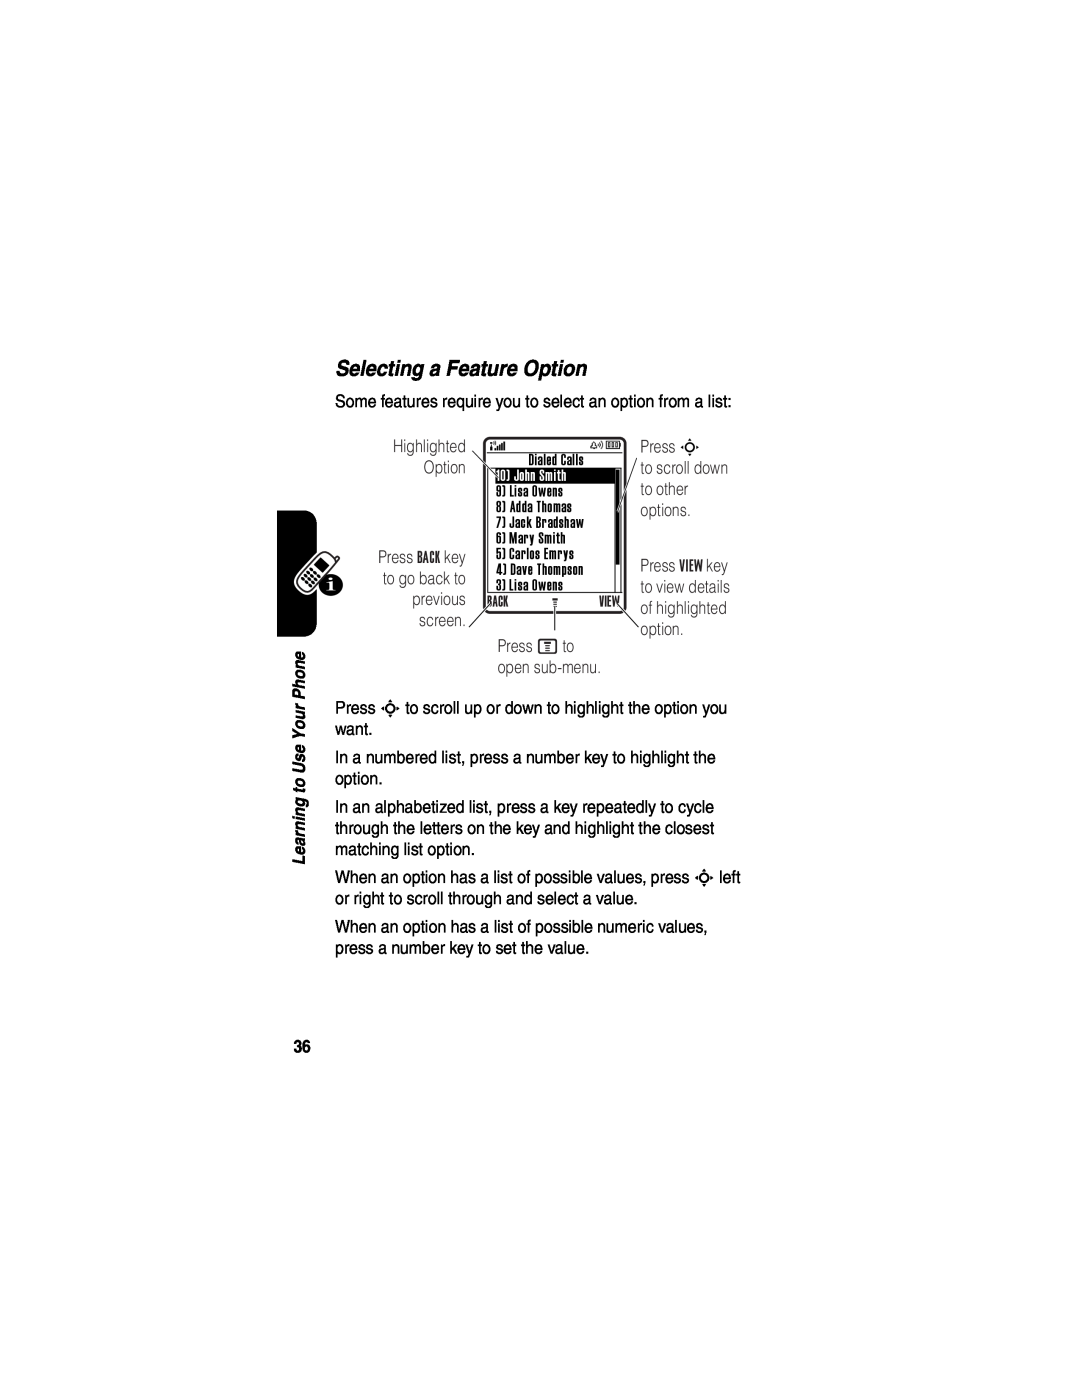 Motorola V635 manual Selecting a Feature Option, of highlighted 